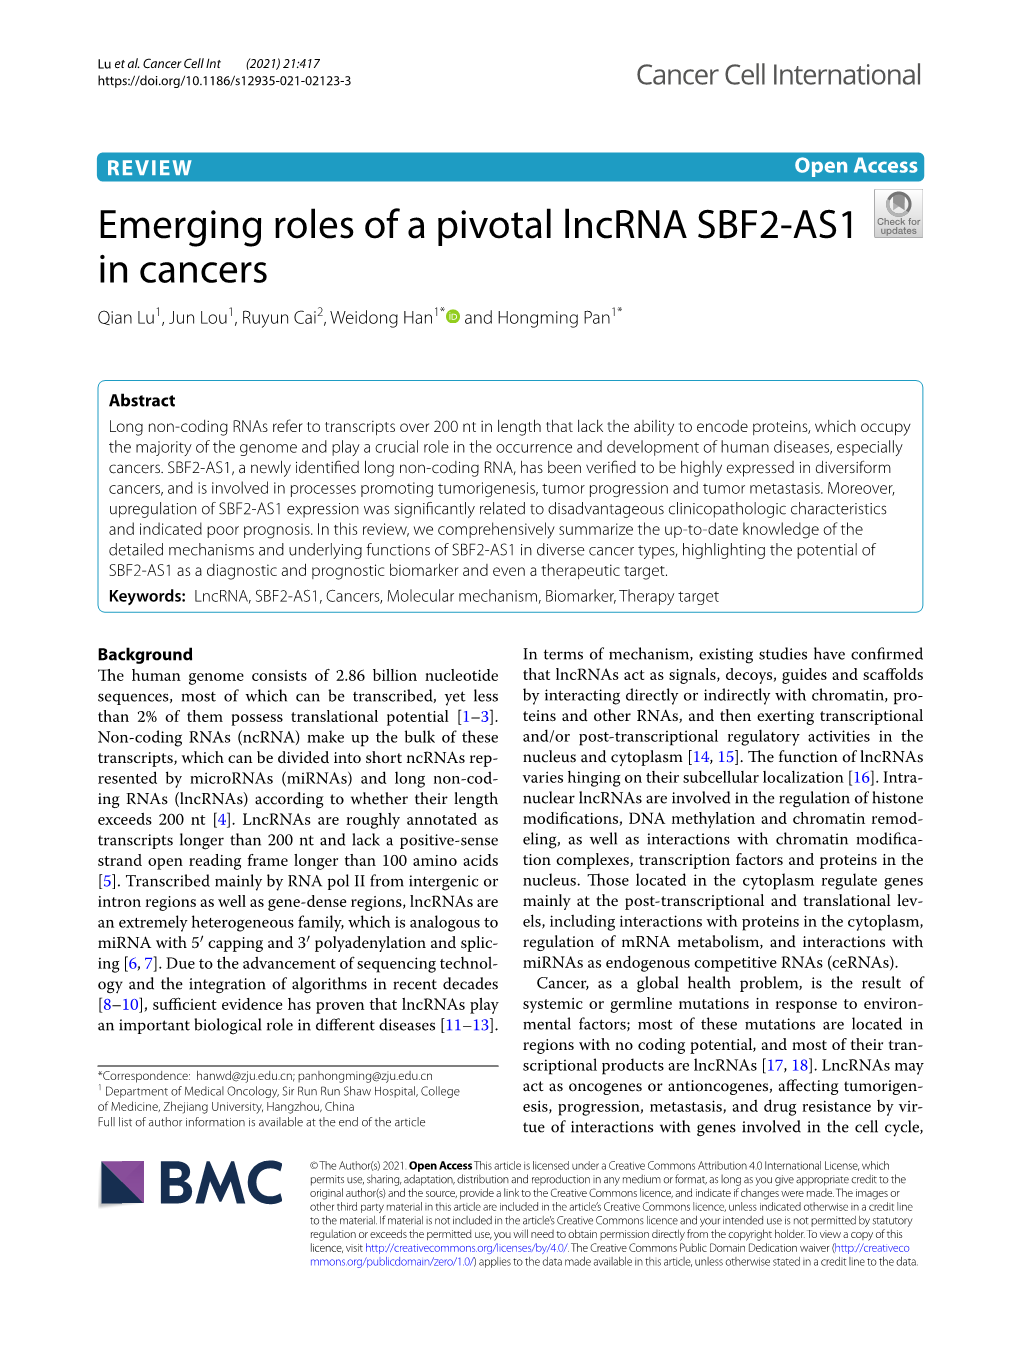 Emerging Roles of a Pivotal Lncrna SBF2-AS1 in Cancers